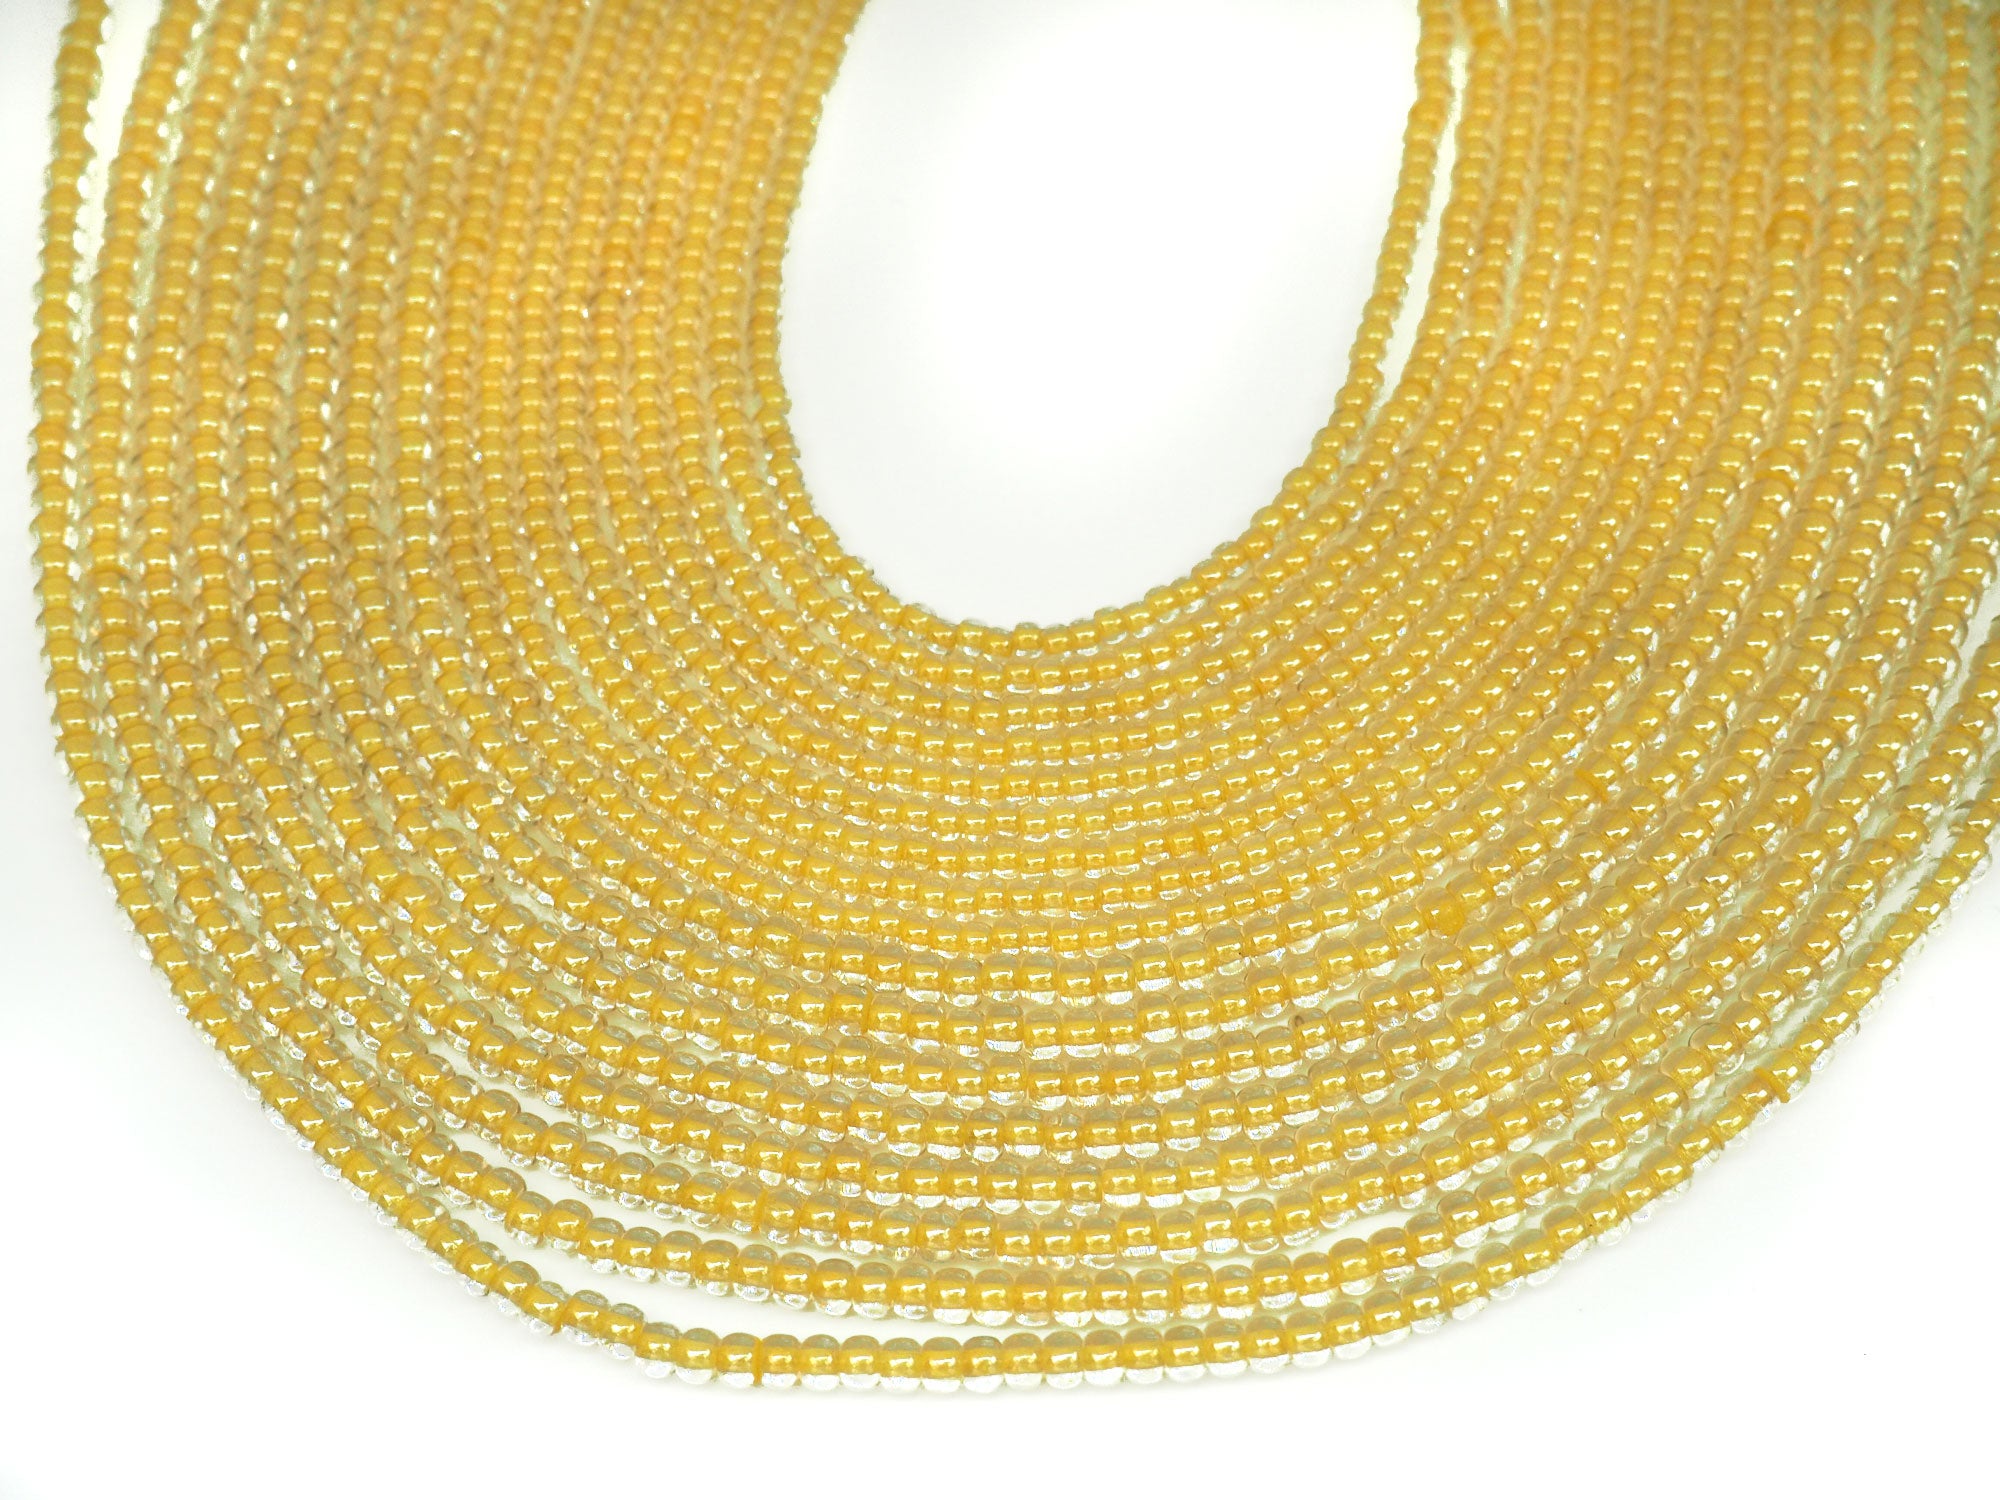 'Czech Round Smooth Pressed POPPY Glass Beads in Crystal Satin Yellow Lined color, 2x3mm (size 8/0), 3x4mm (size 6/0) Druk Bead